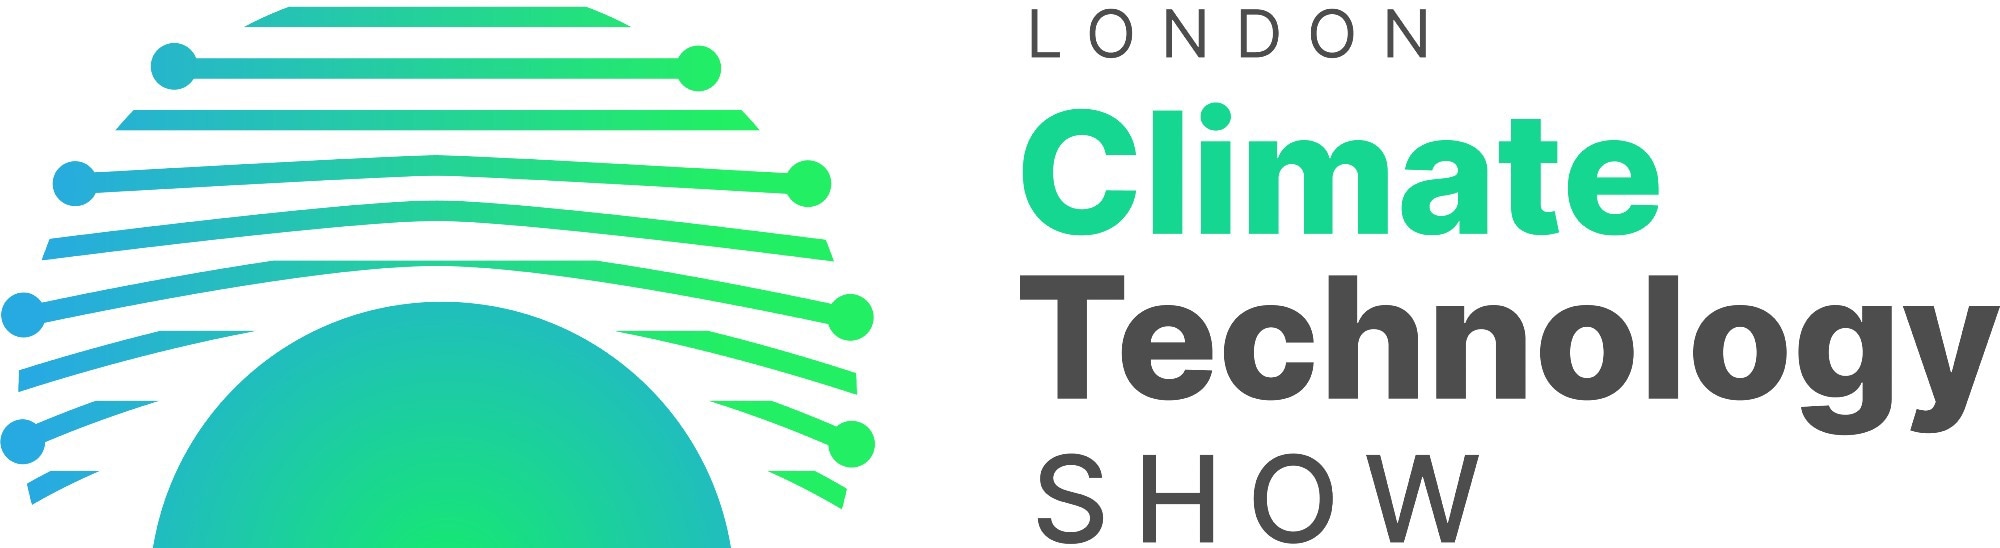 The London Climate Technology Show